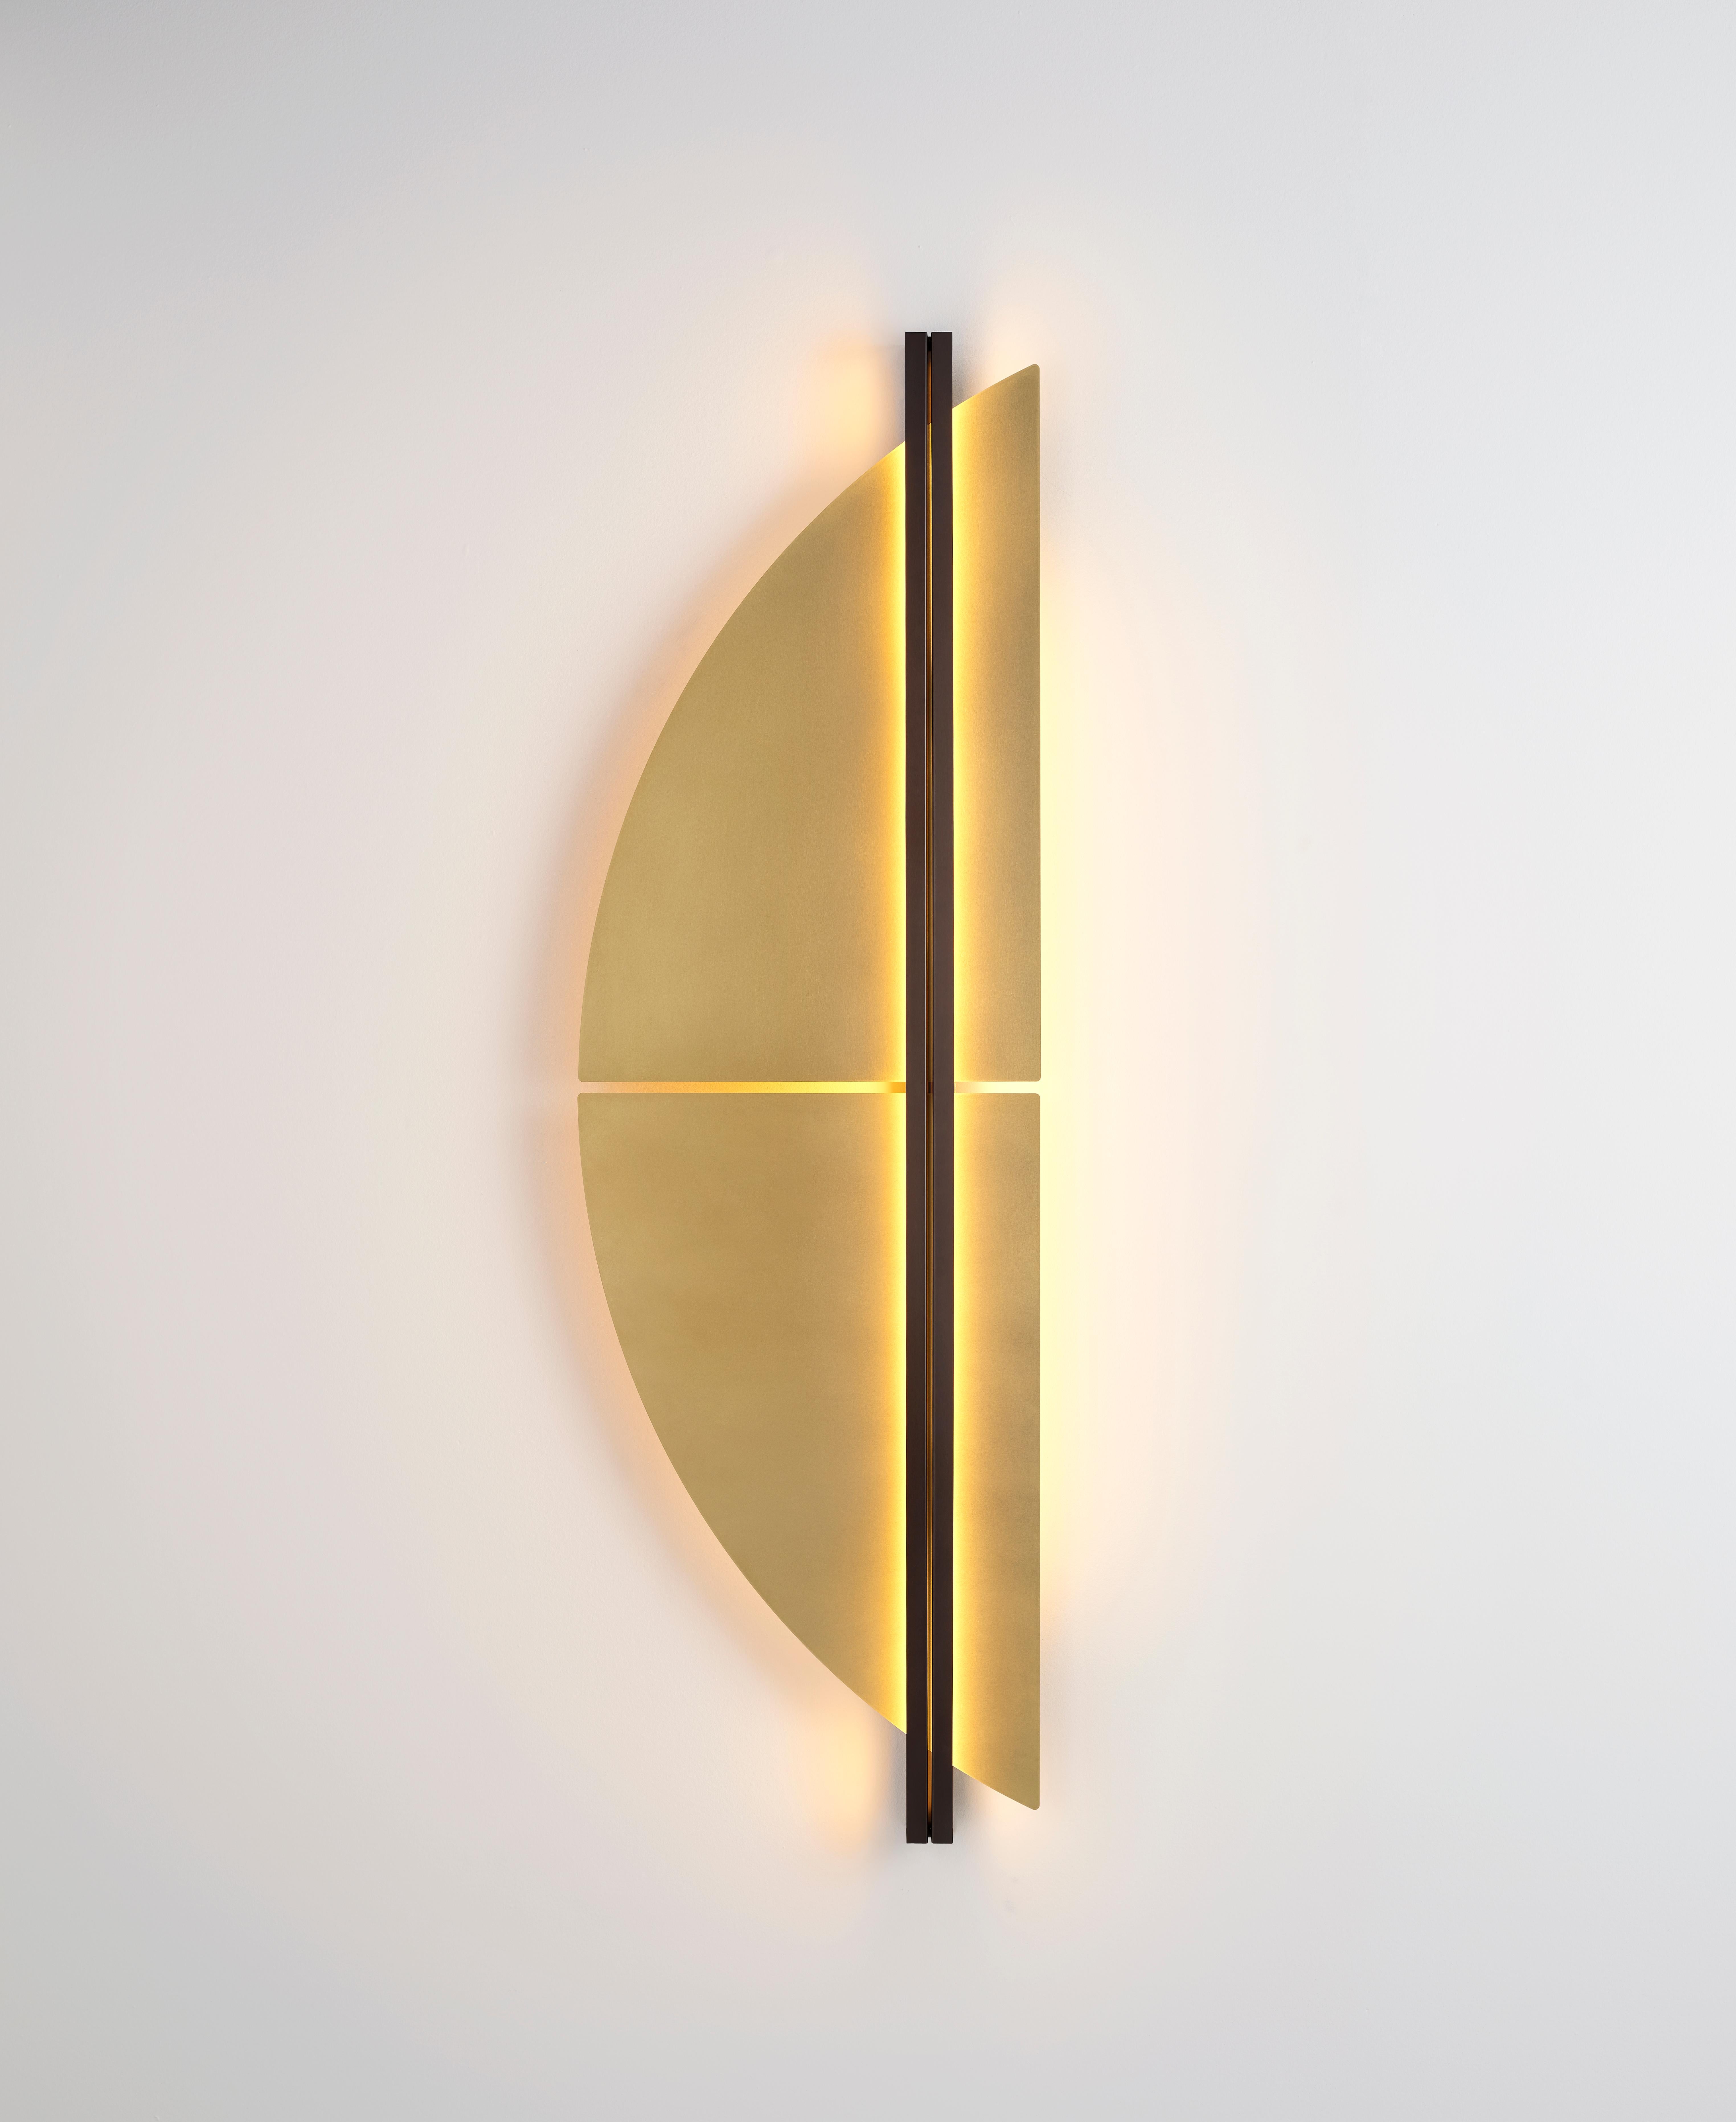 Strate Spi wall light by Emilie Cathelineau
Dimensions: W 46.2 x D 8.7 x H 150 cm
Materials: Solid brass, Polycarbonate diffuser.
Others finishes and dimensions are available.

All our lamps can be wired according to each country. If sold to